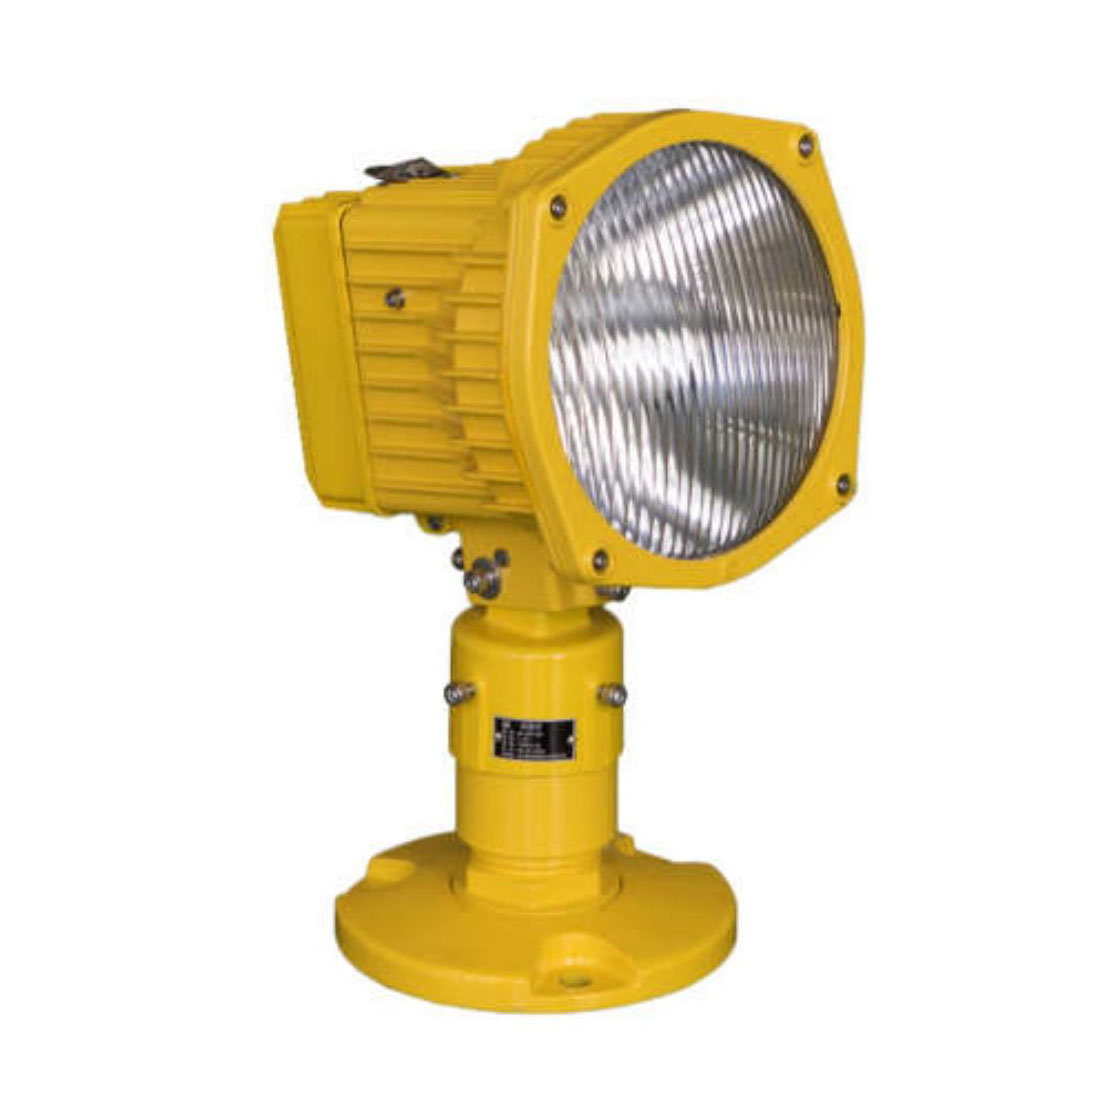 JCL220 LED Elevated Runway Threshold Light